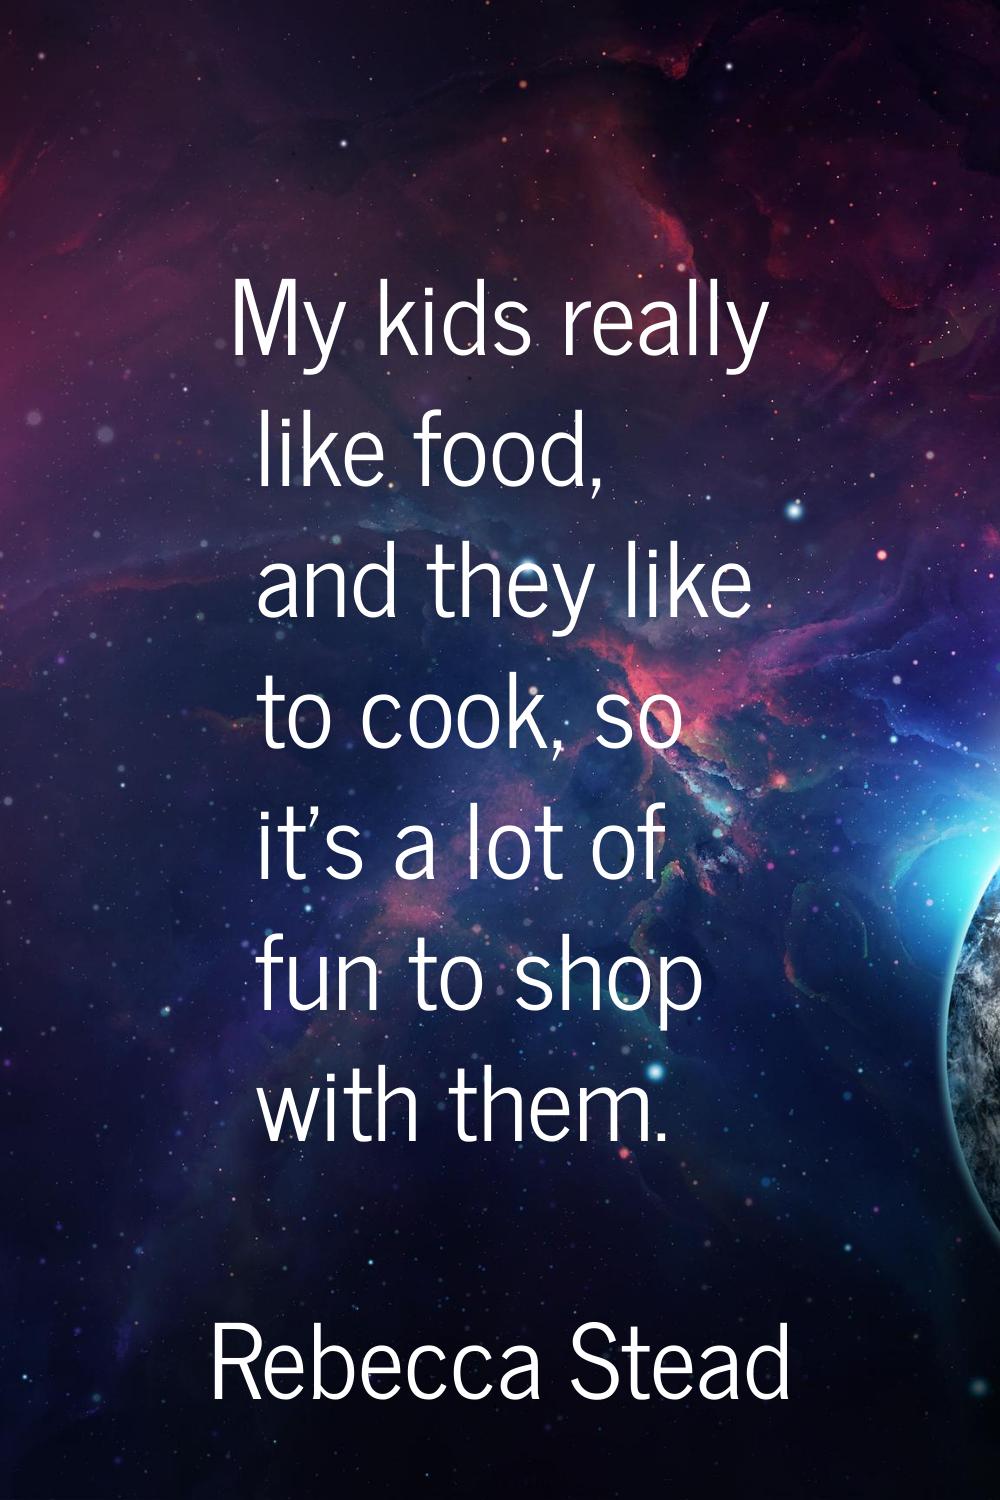 My kids really like food, and they like to cook, so it's a lot of fun to shop with them.